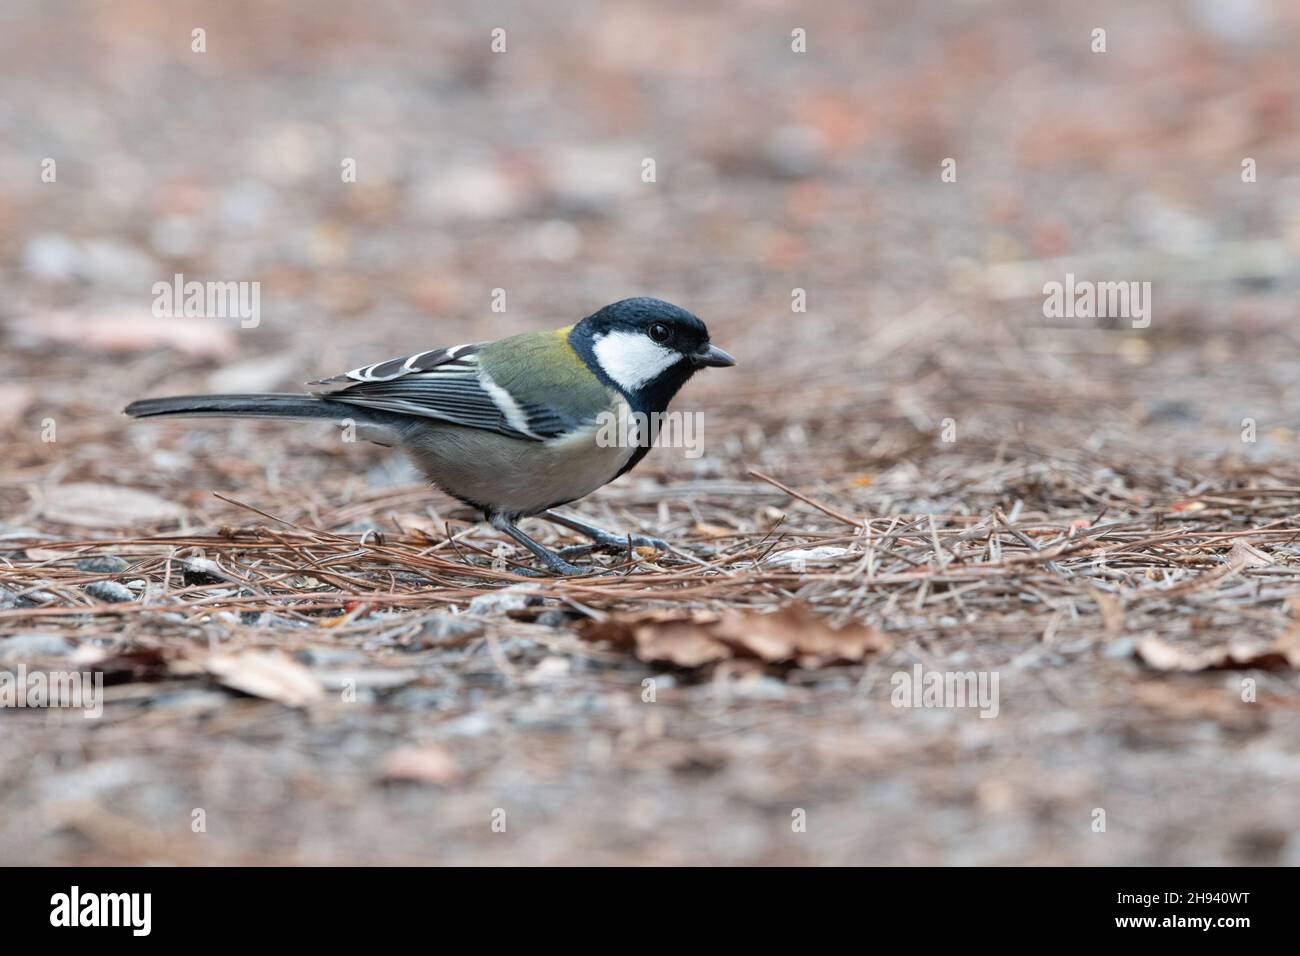 The Japanese tit (Parus minor), also known as the Oriental tit, is a passerine bird. Until recently, this species was classified as a subspecies of gr Stock Photo